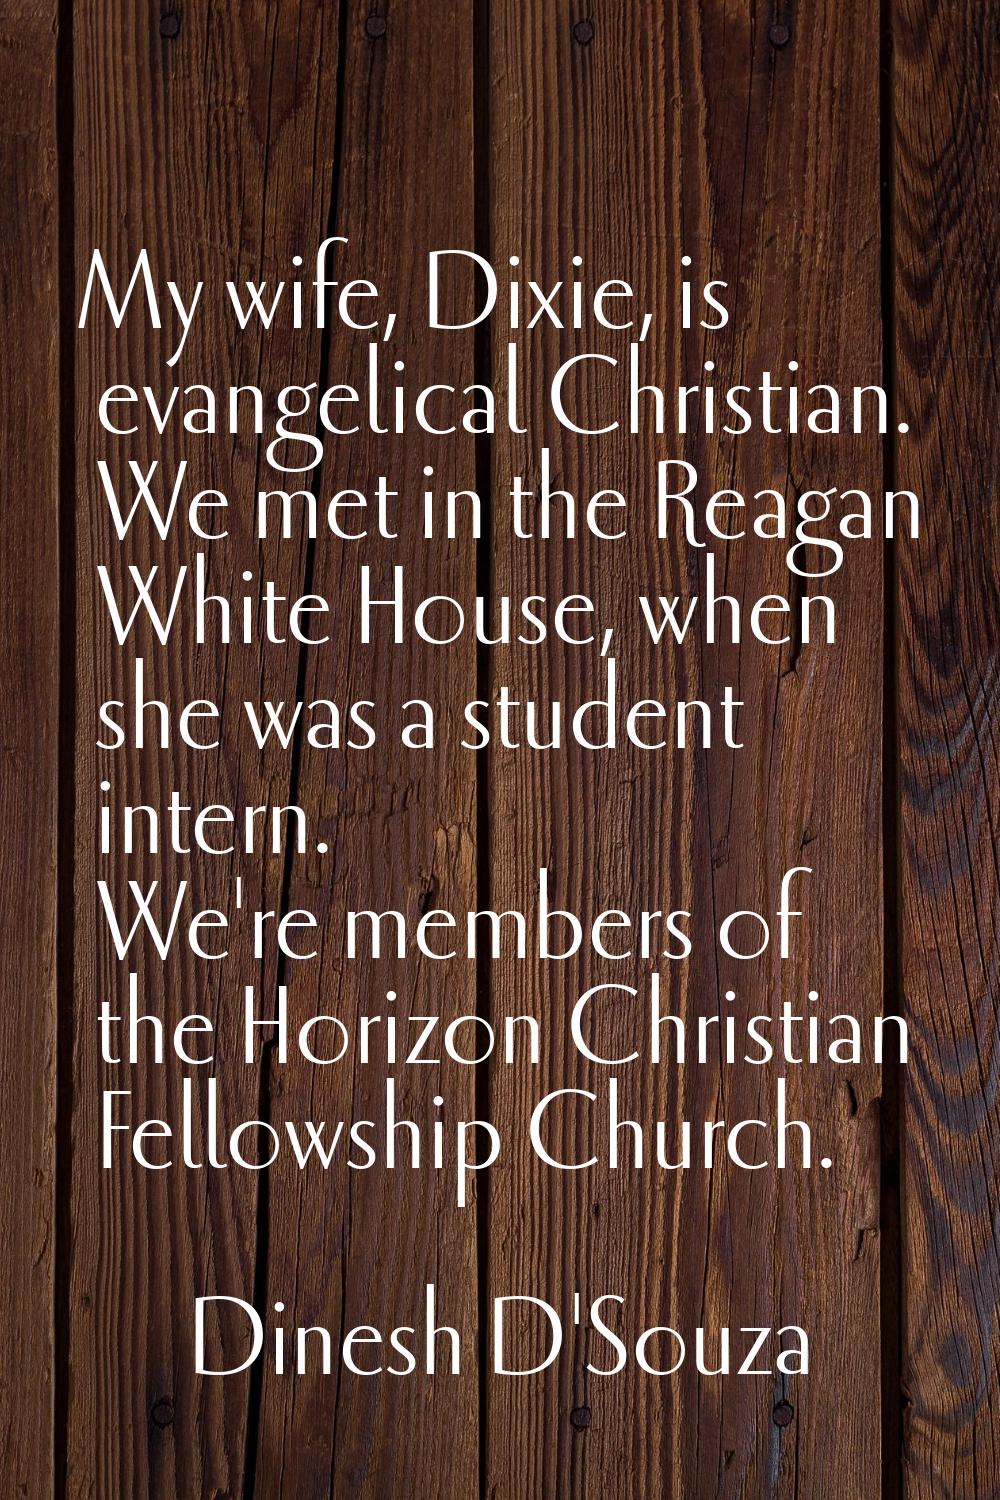 My wife, Dixie, is evangelical Christian. We met in the Reagan White House, when she was a student 